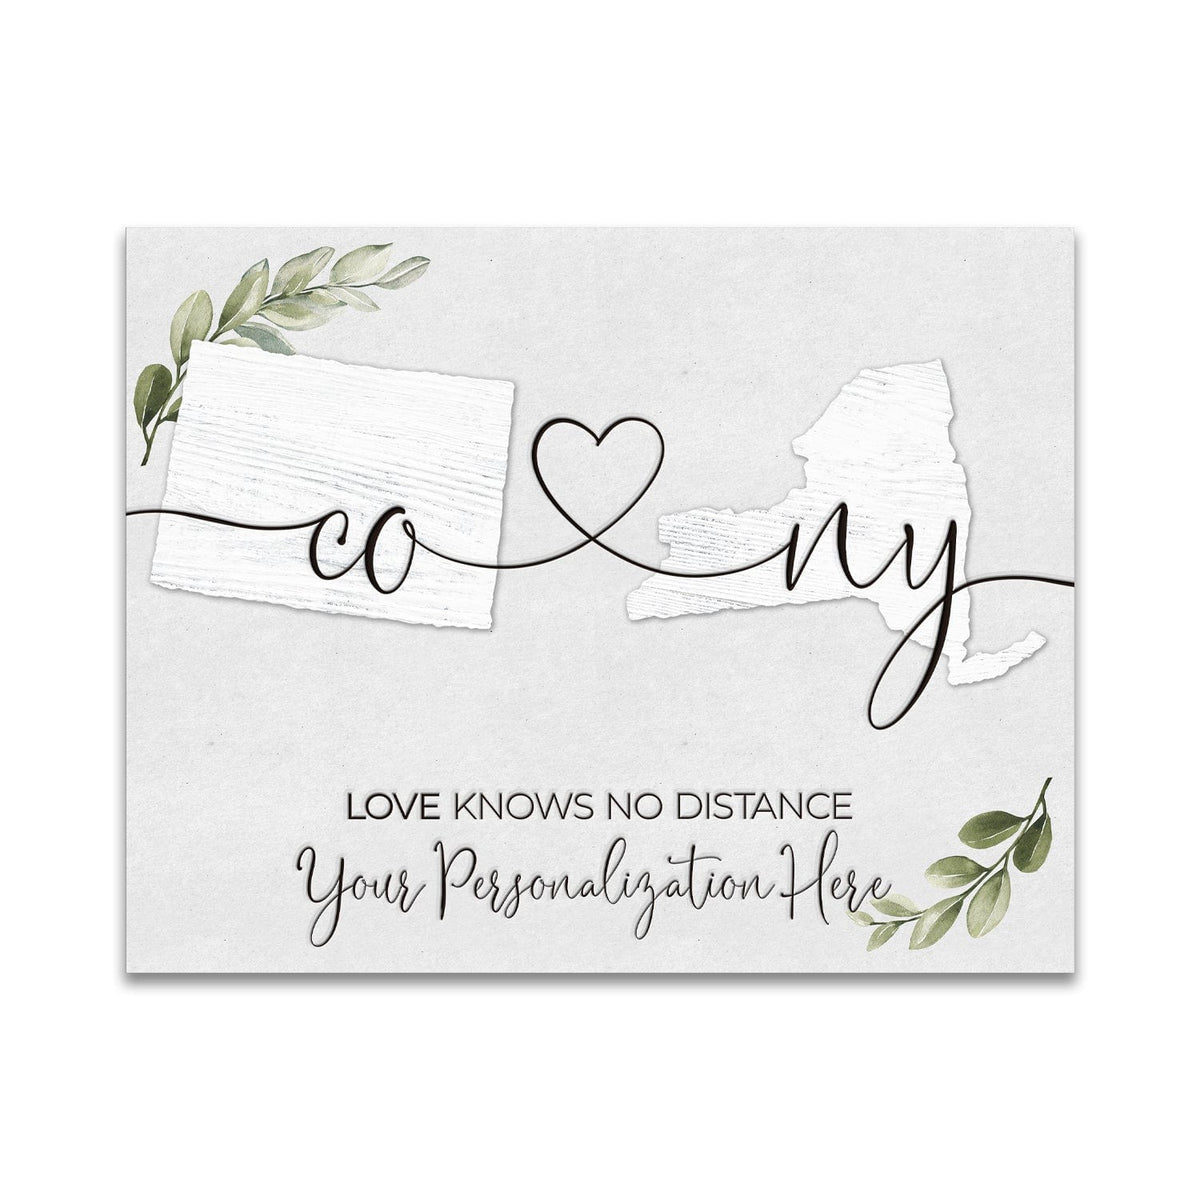 Love knows no distance personalized gift